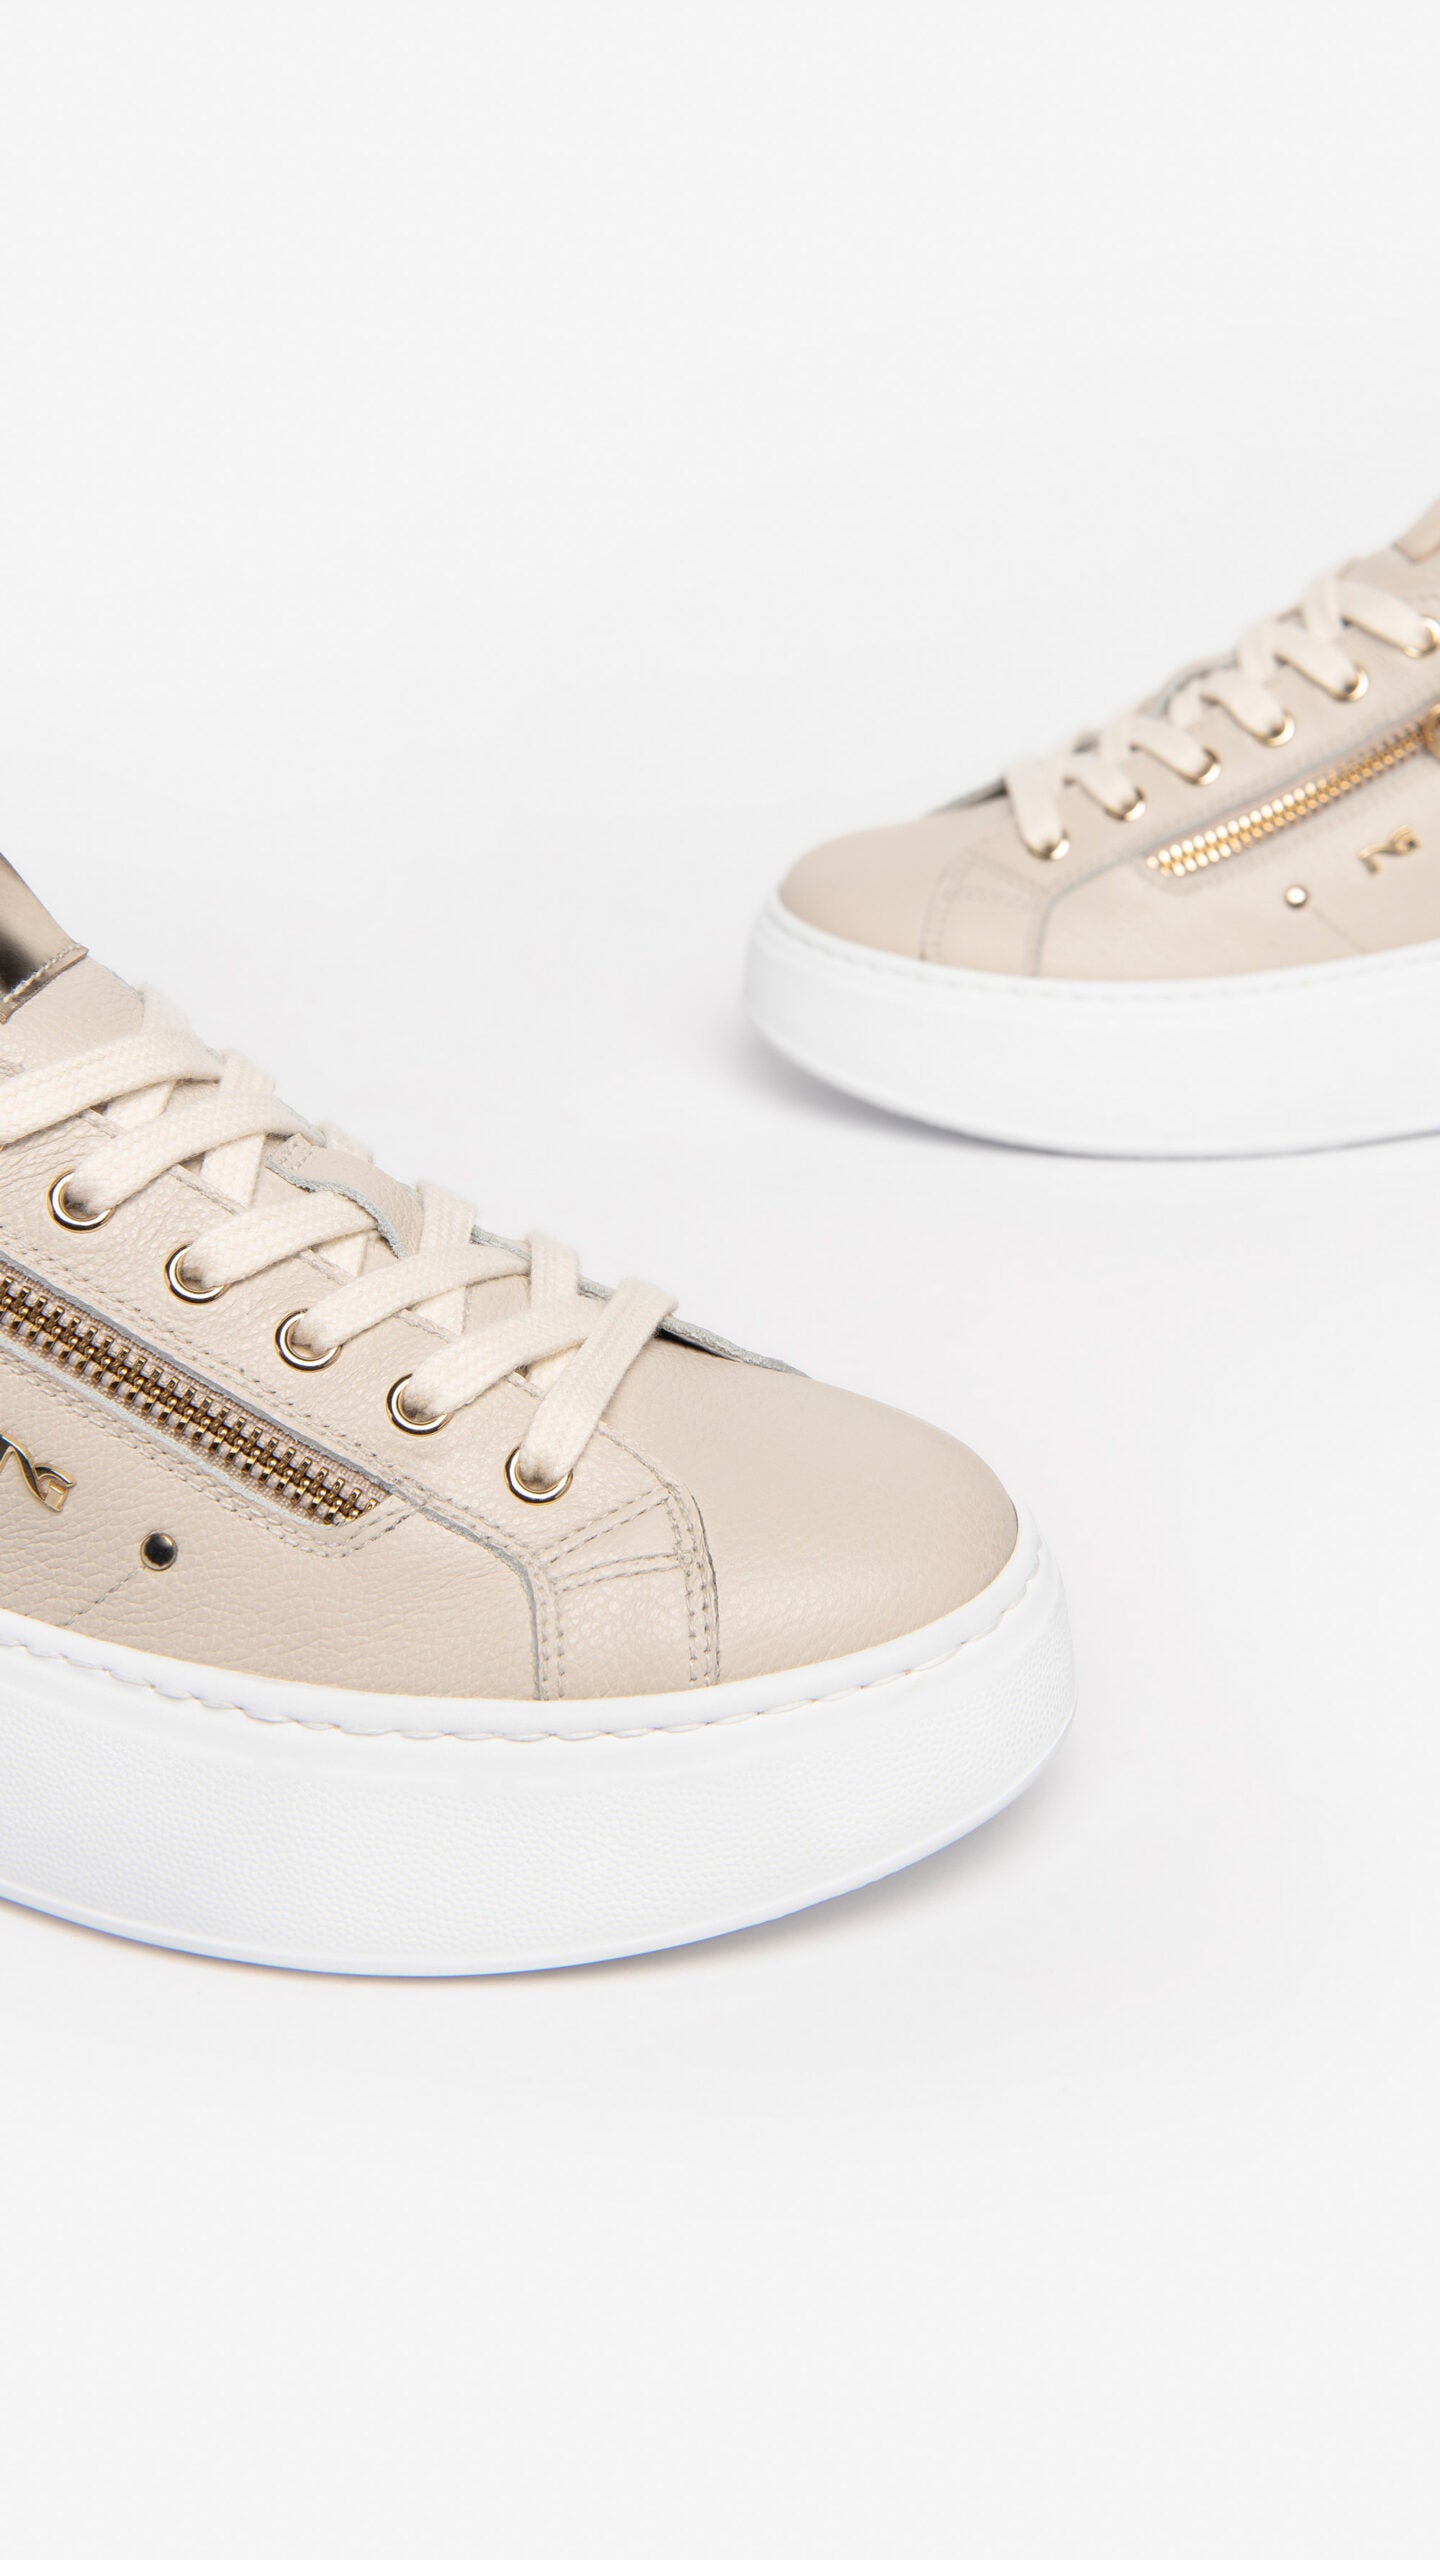 NeroGiardini Dollarino Beige and Gold Leather Wedge Trainer with side zip.